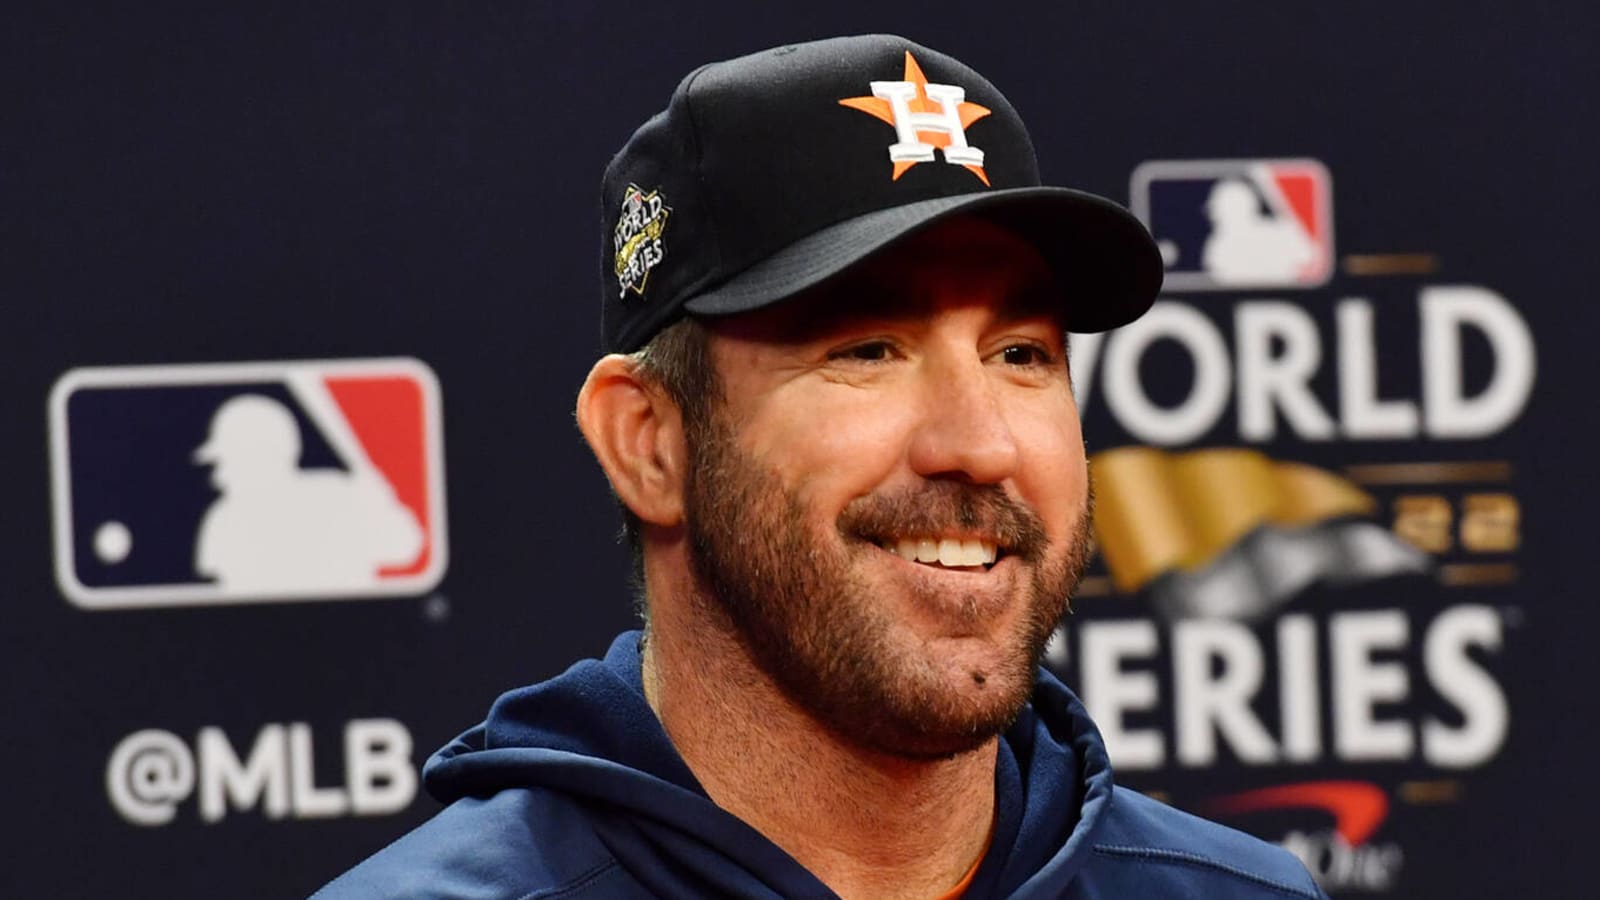 Verlander makes history with latest Cy Young Award